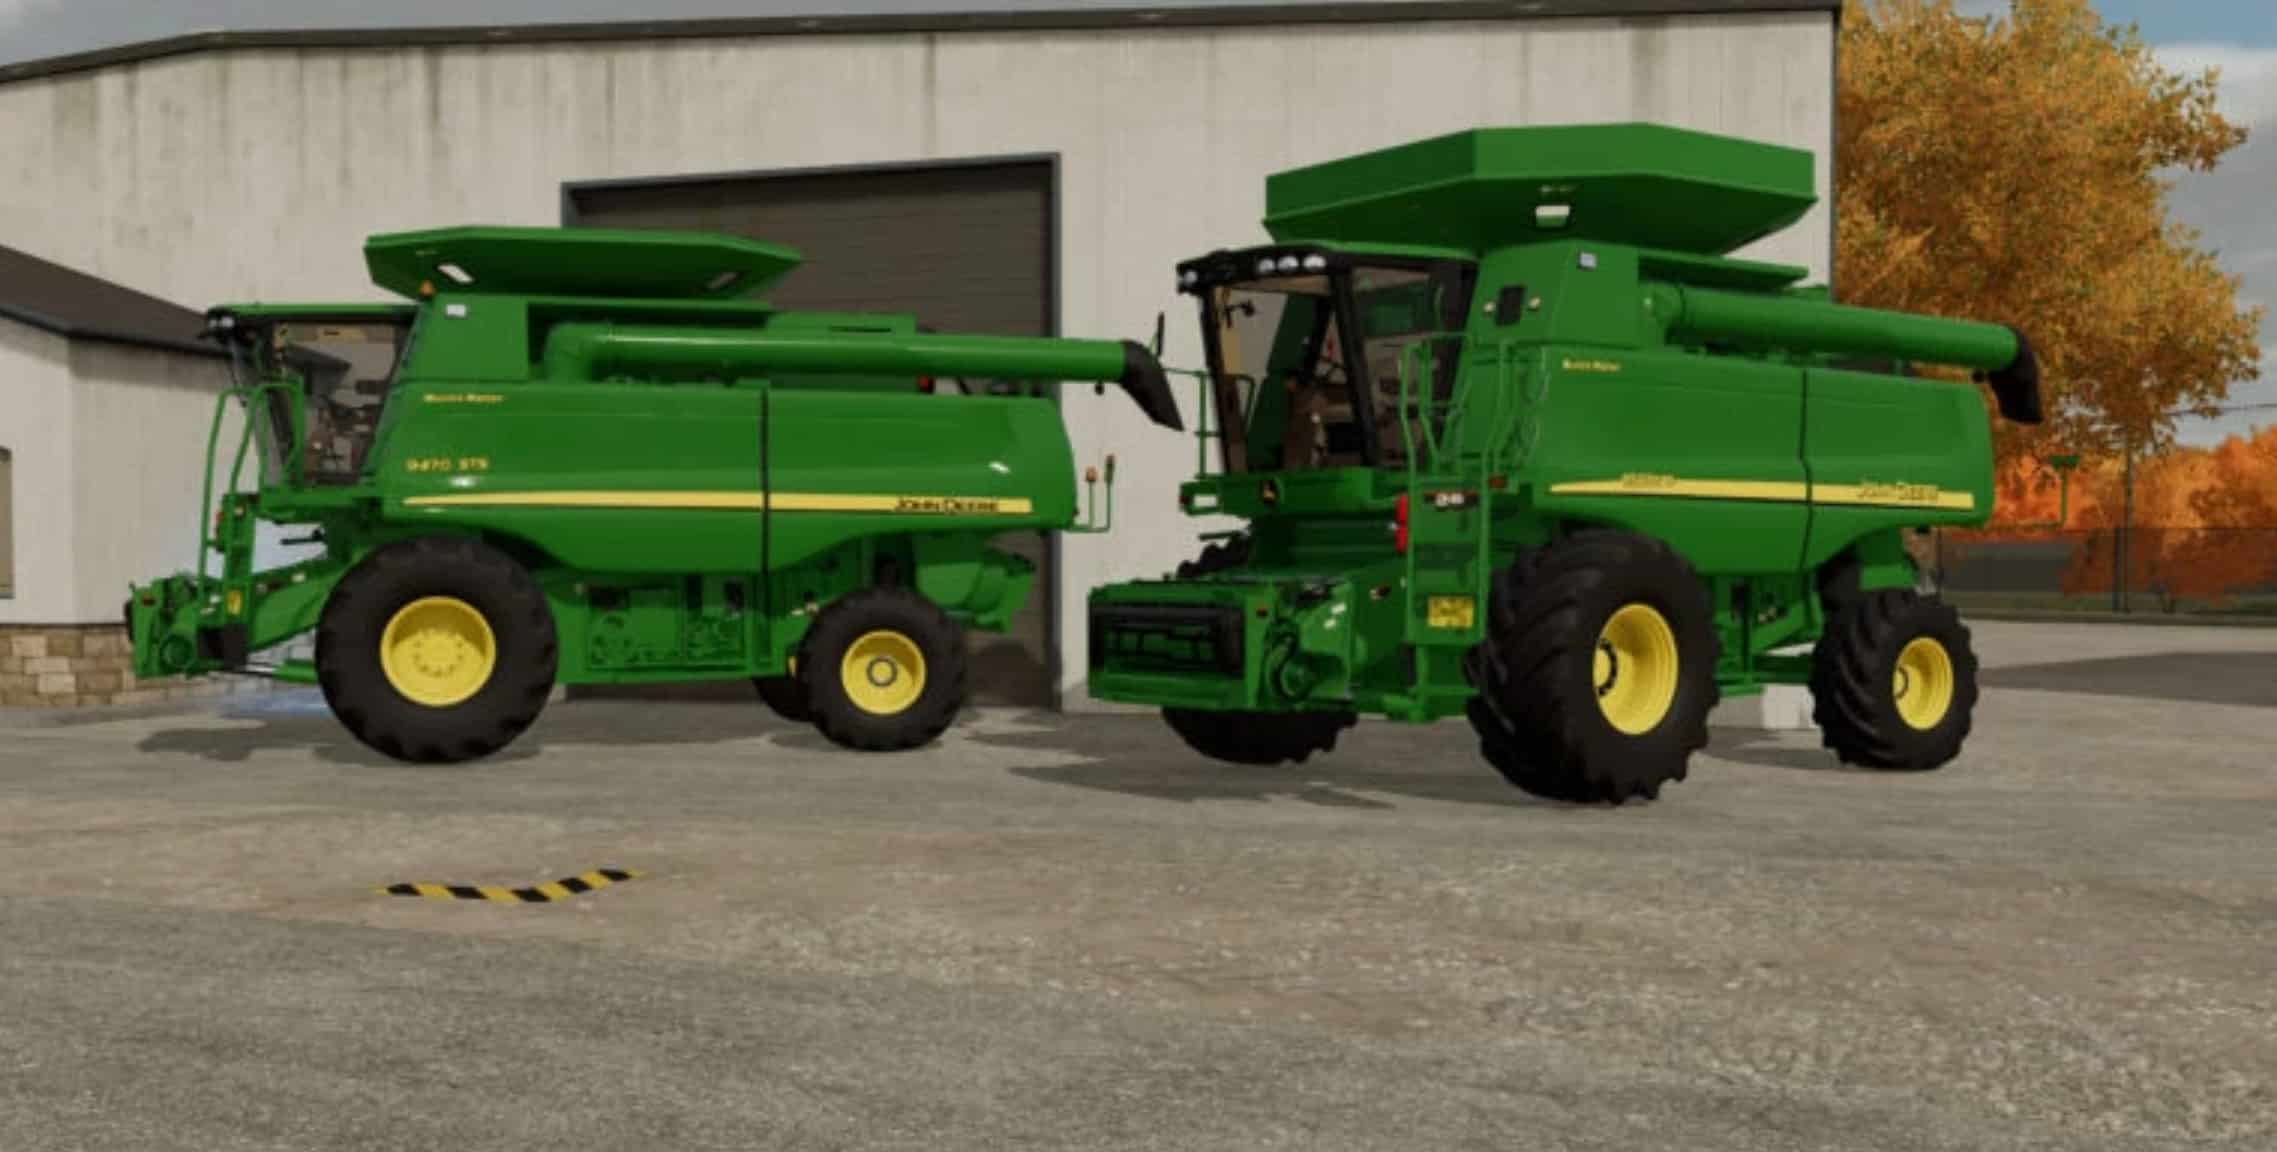 JOHN DEERE 60 SERIES AND 70 SERIES STS COMBINES v1.0.0.0 | FS22 Mod ...